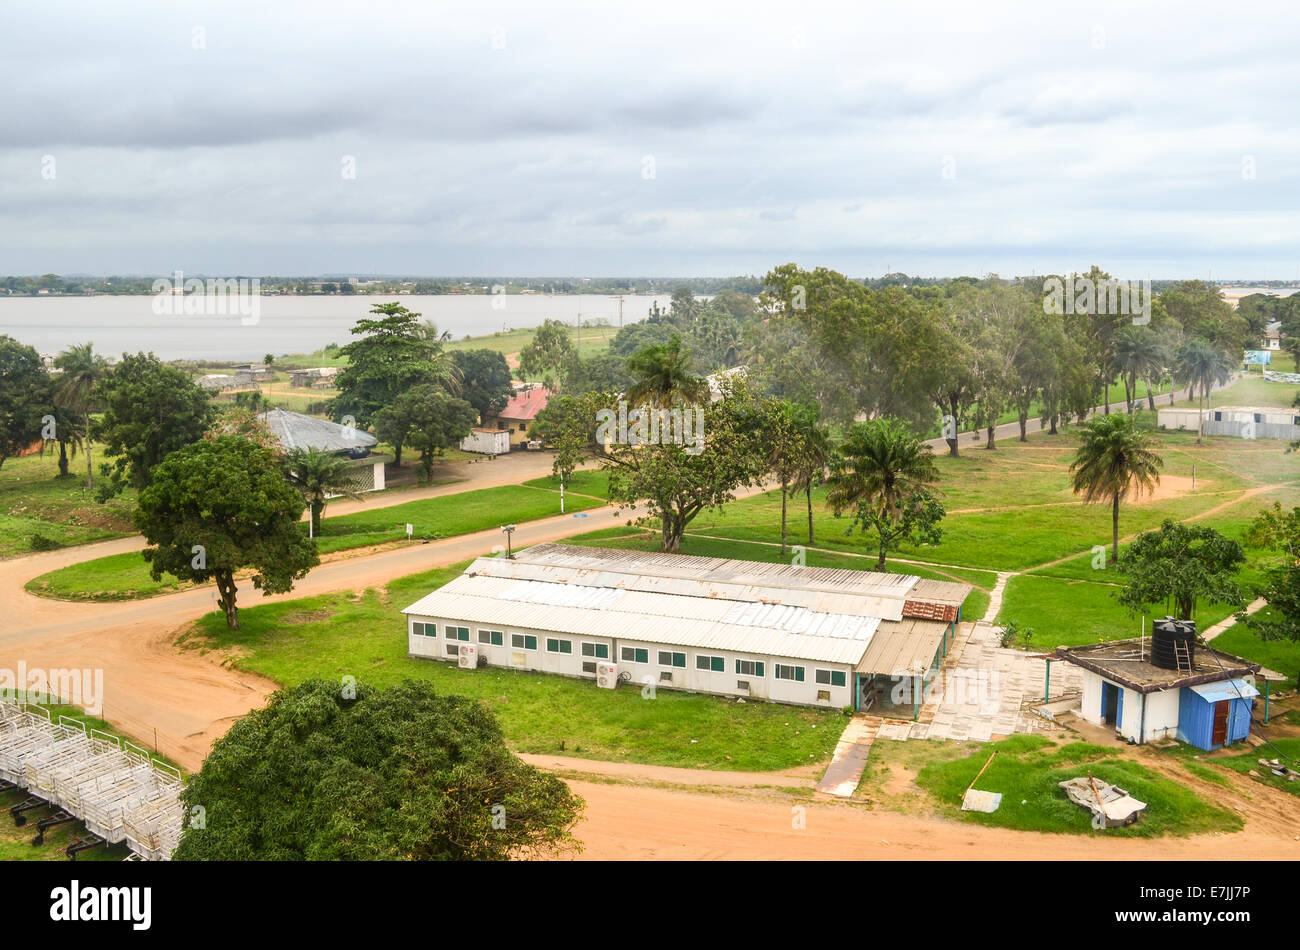 Hangar and base camp of a UN camp in Monrovia, Liberia, seen from the top of the ruins of Hotel Africa Stock Photo